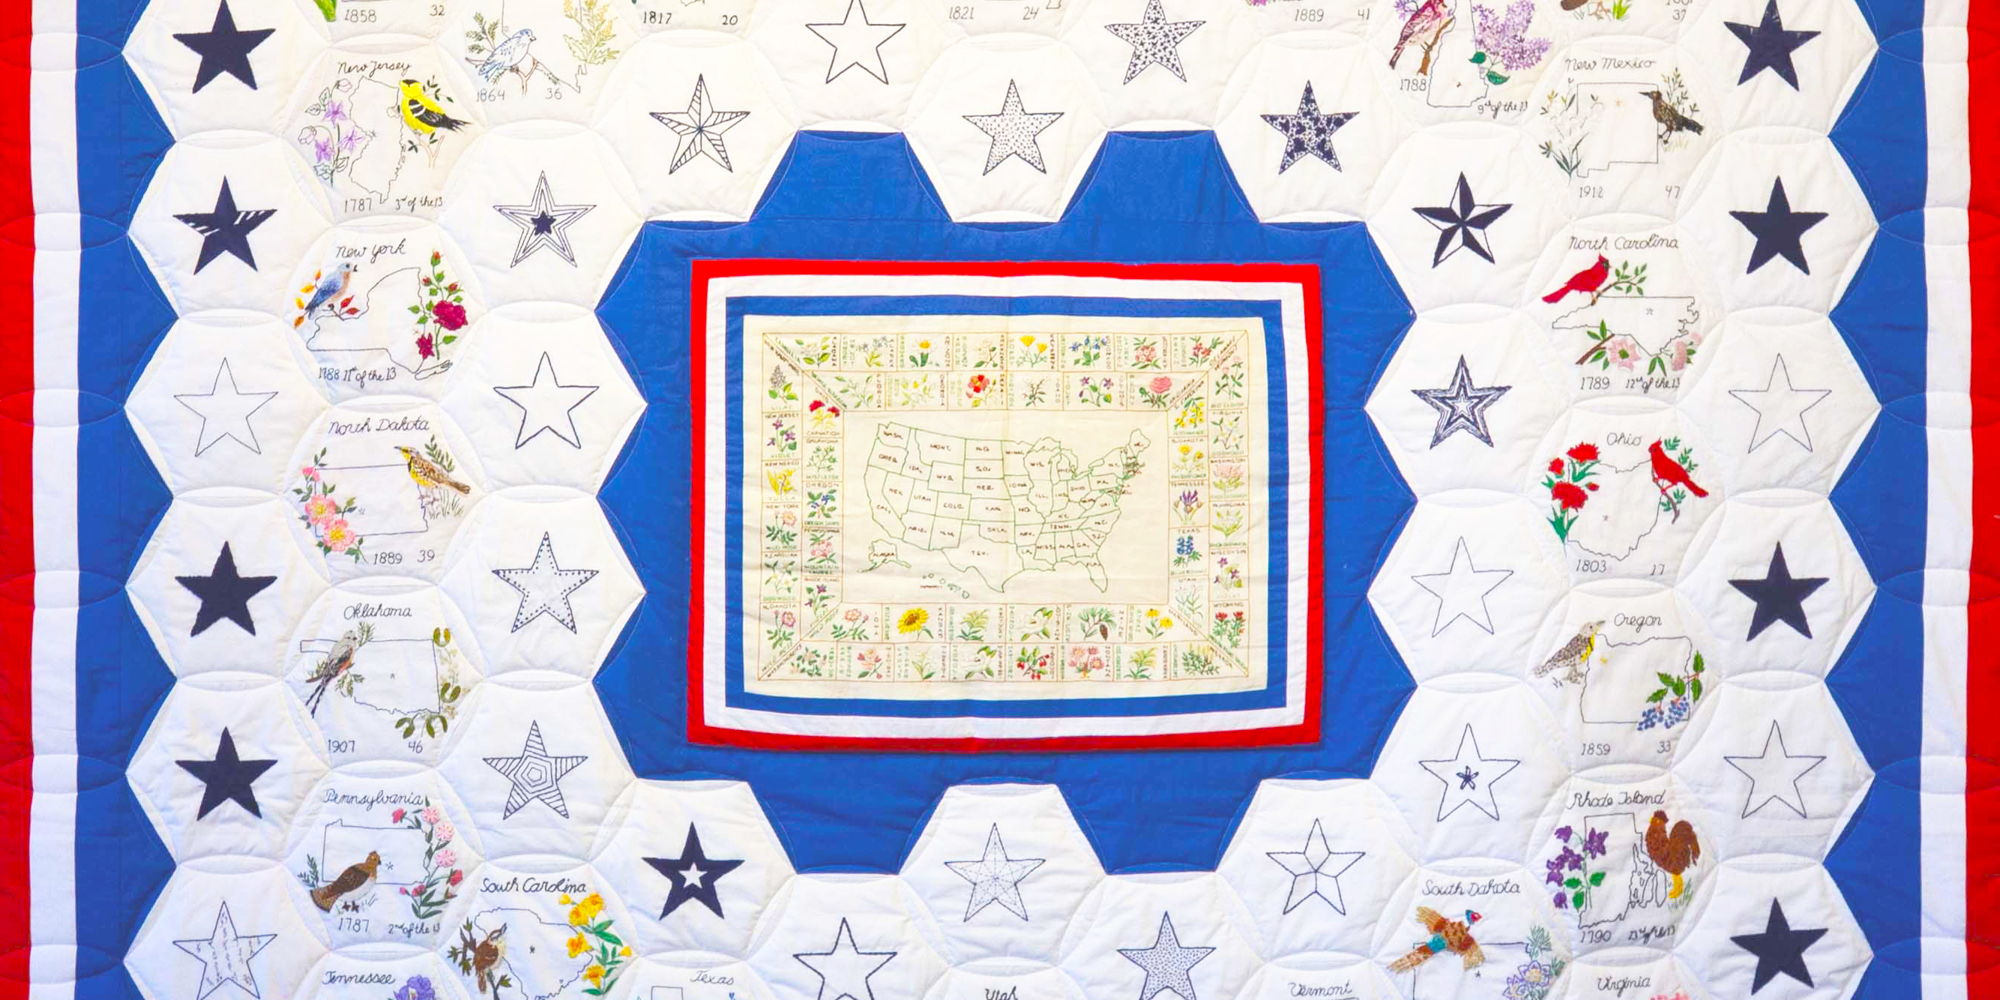 Rita's Quilt Talk Featuring Shannon Downey promotional image